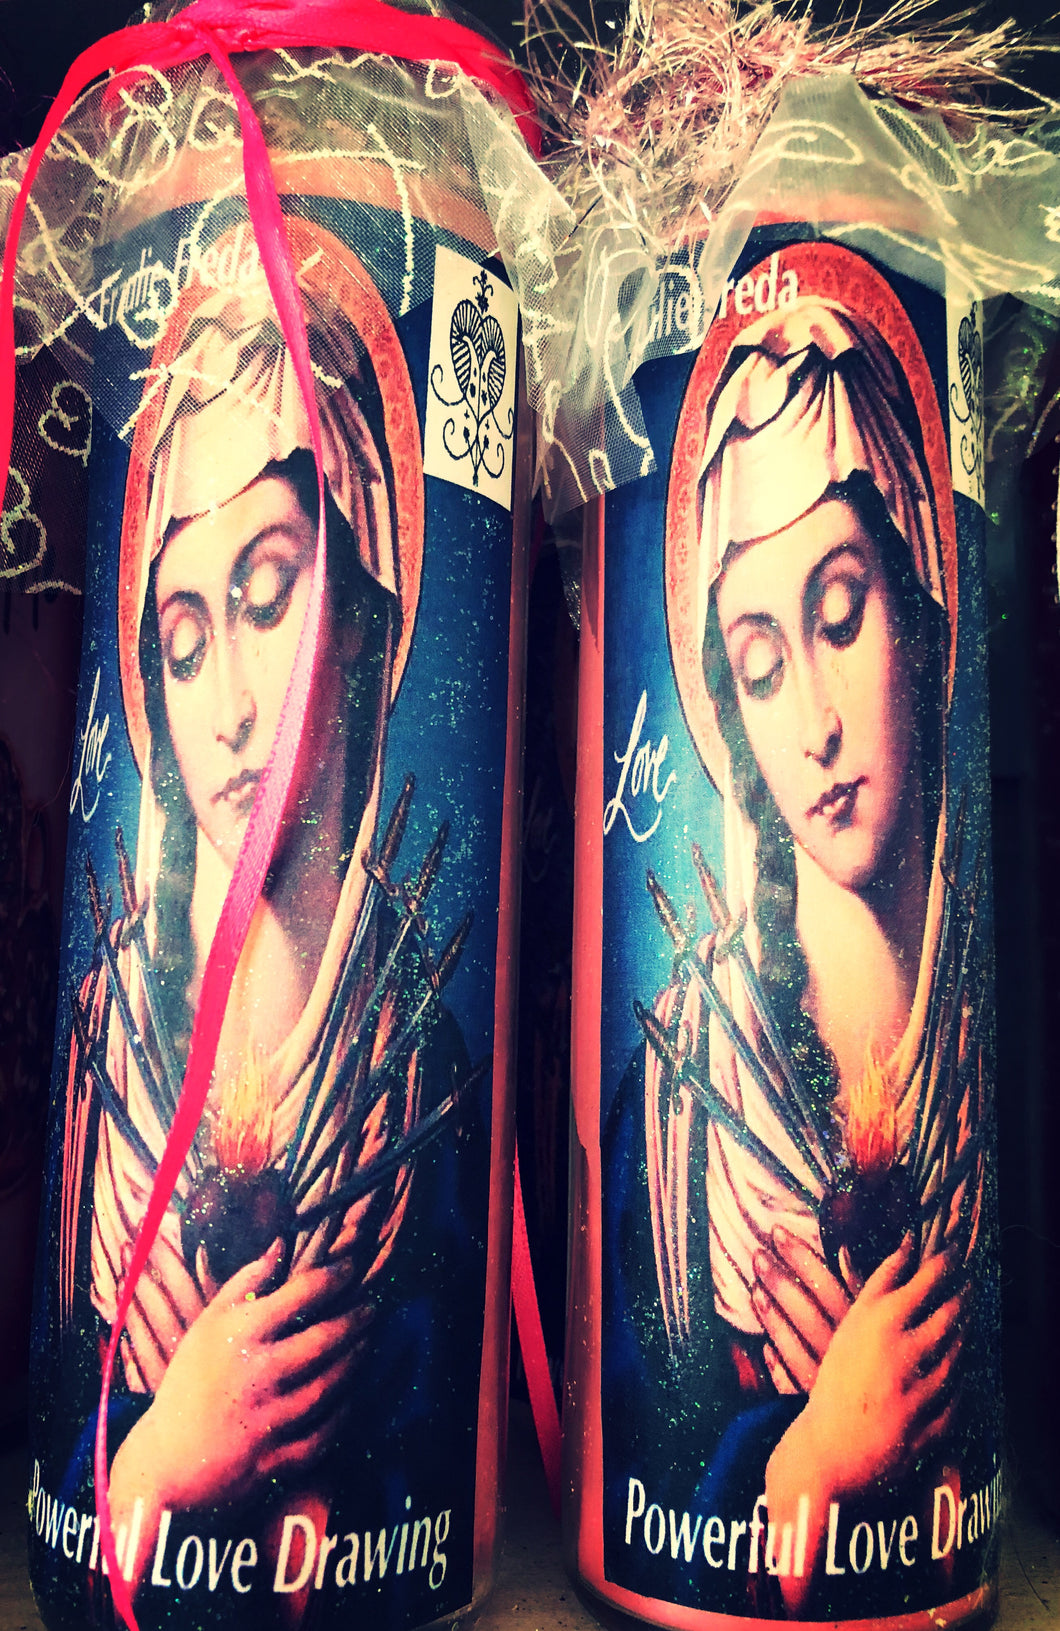 Erzulie Freda Powerful Love Drawing Novena Spell Candle